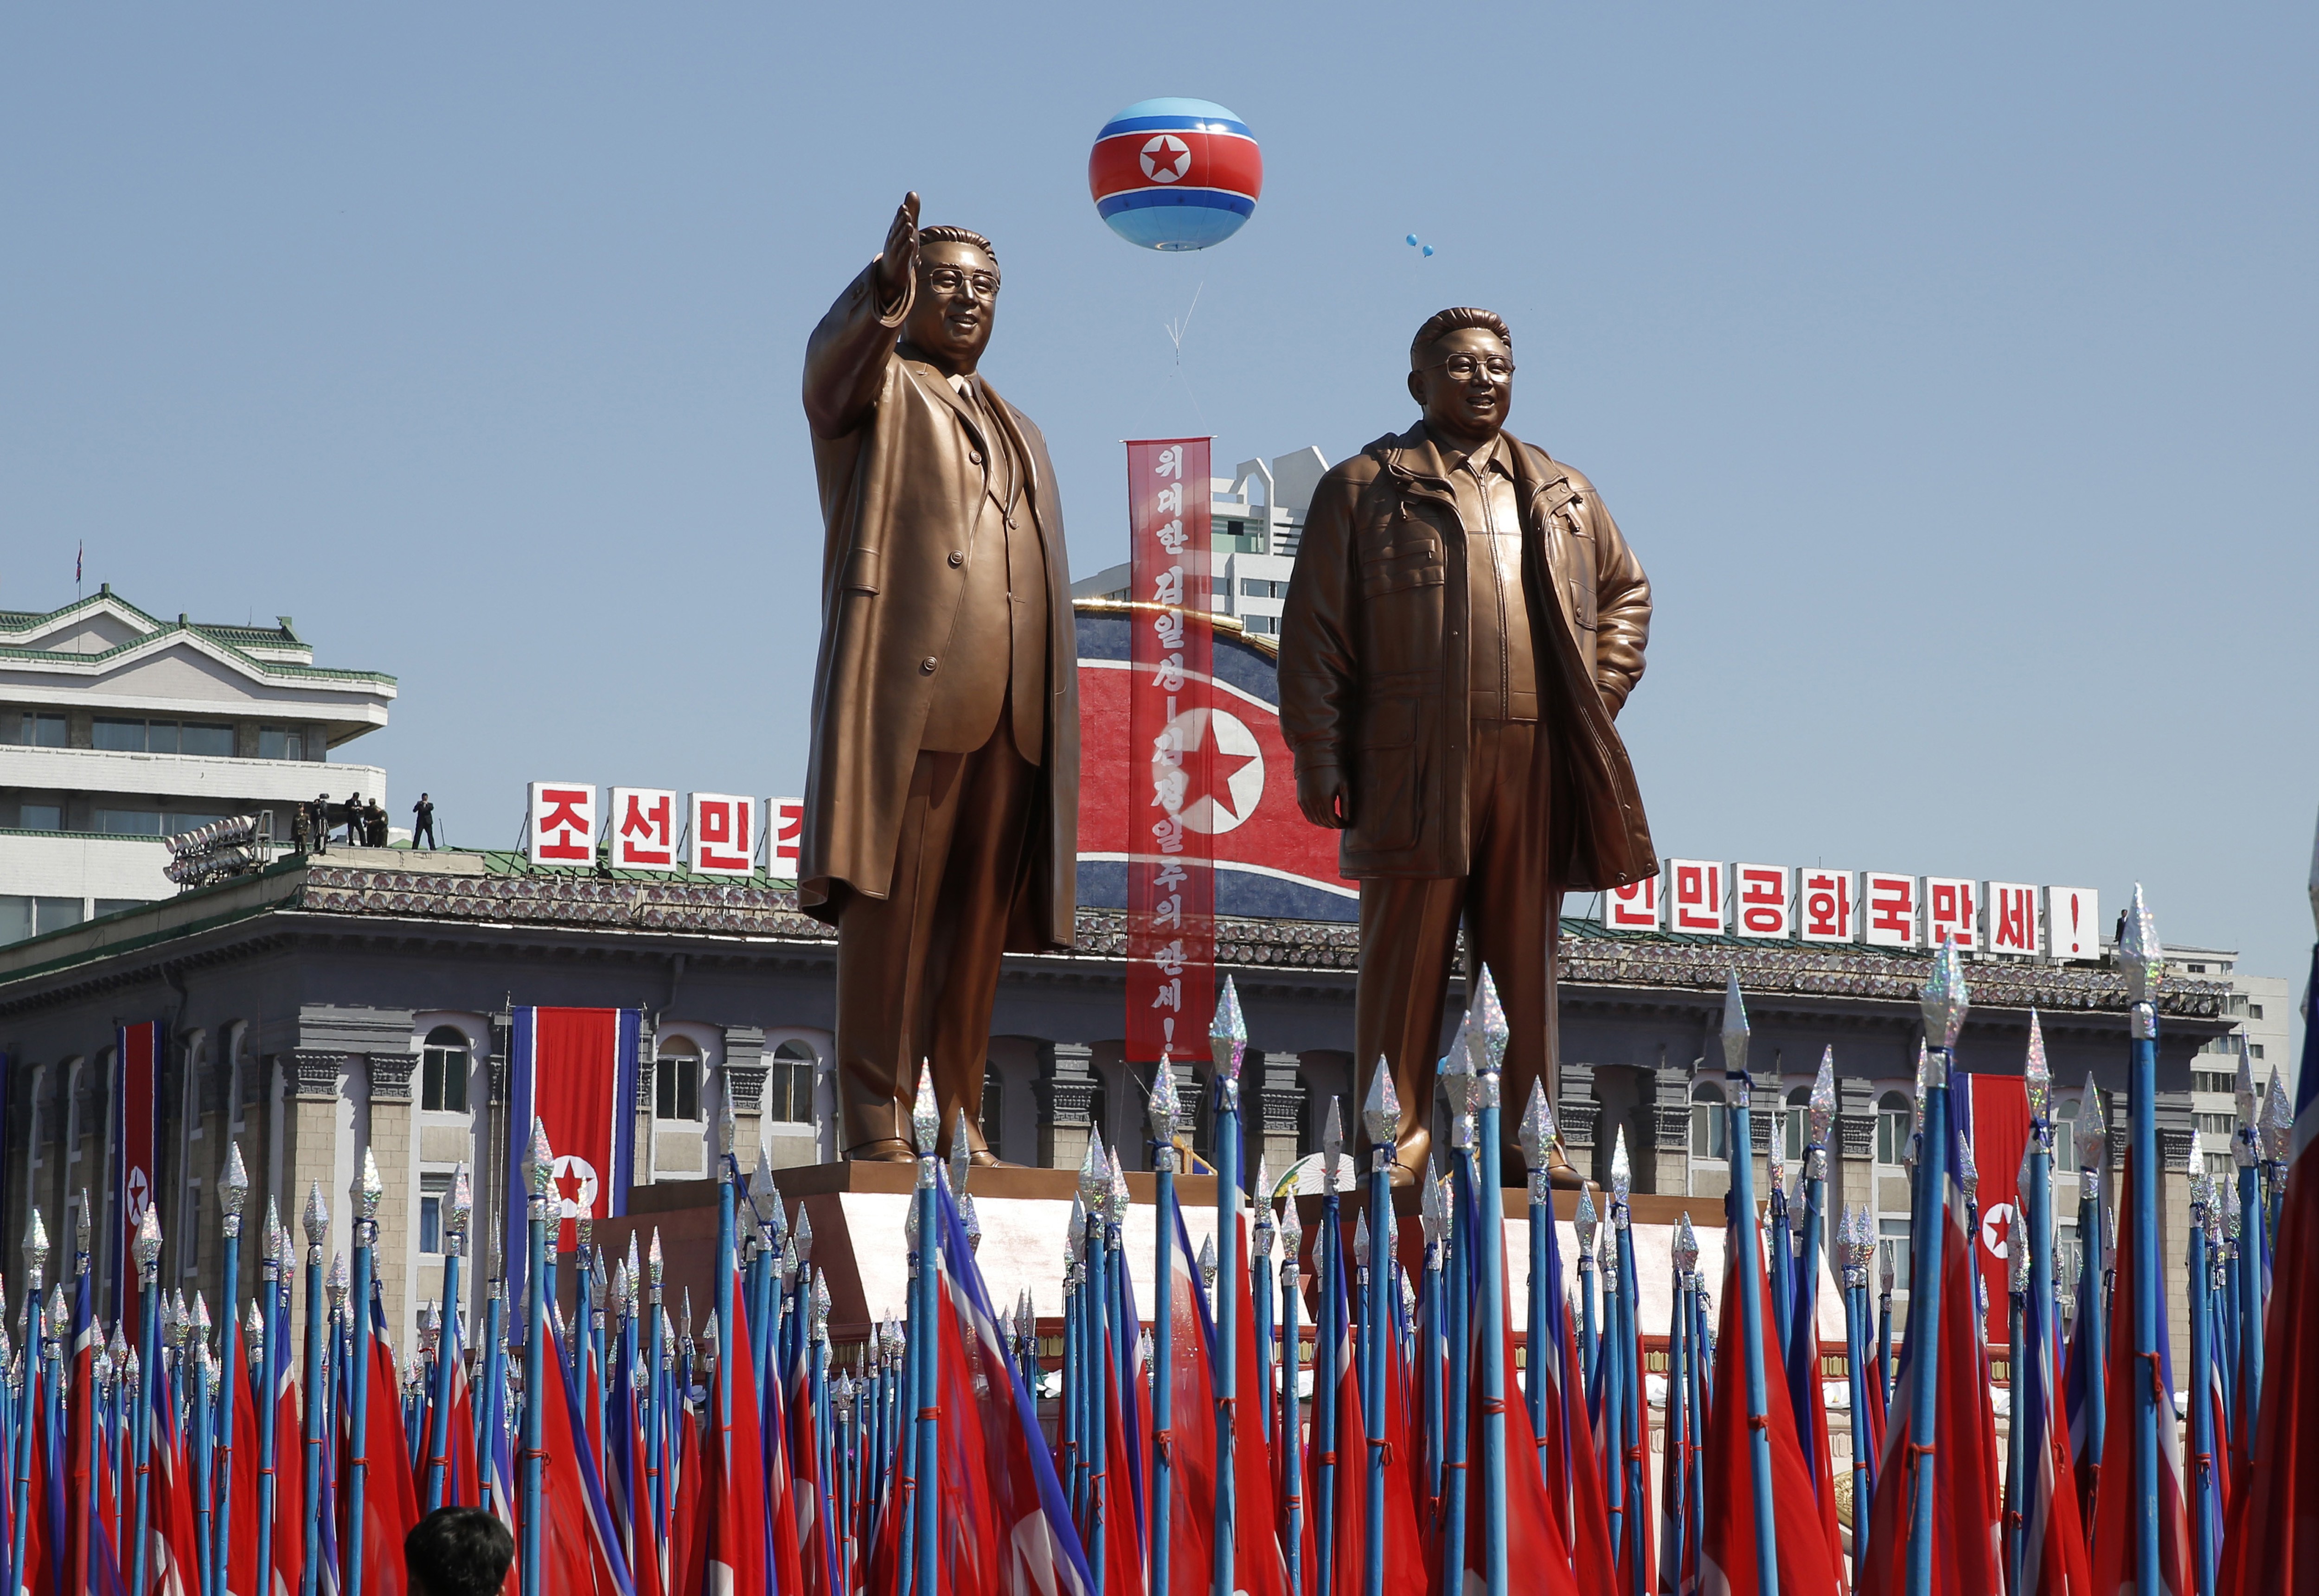 A float with statues of late North Korean leaders Kim Il-sung and Kim Jong-il during a parade in September last year marking the 70th anniversary of North Korea’s founding day in Pyongyang, North Korea. Photo: AP